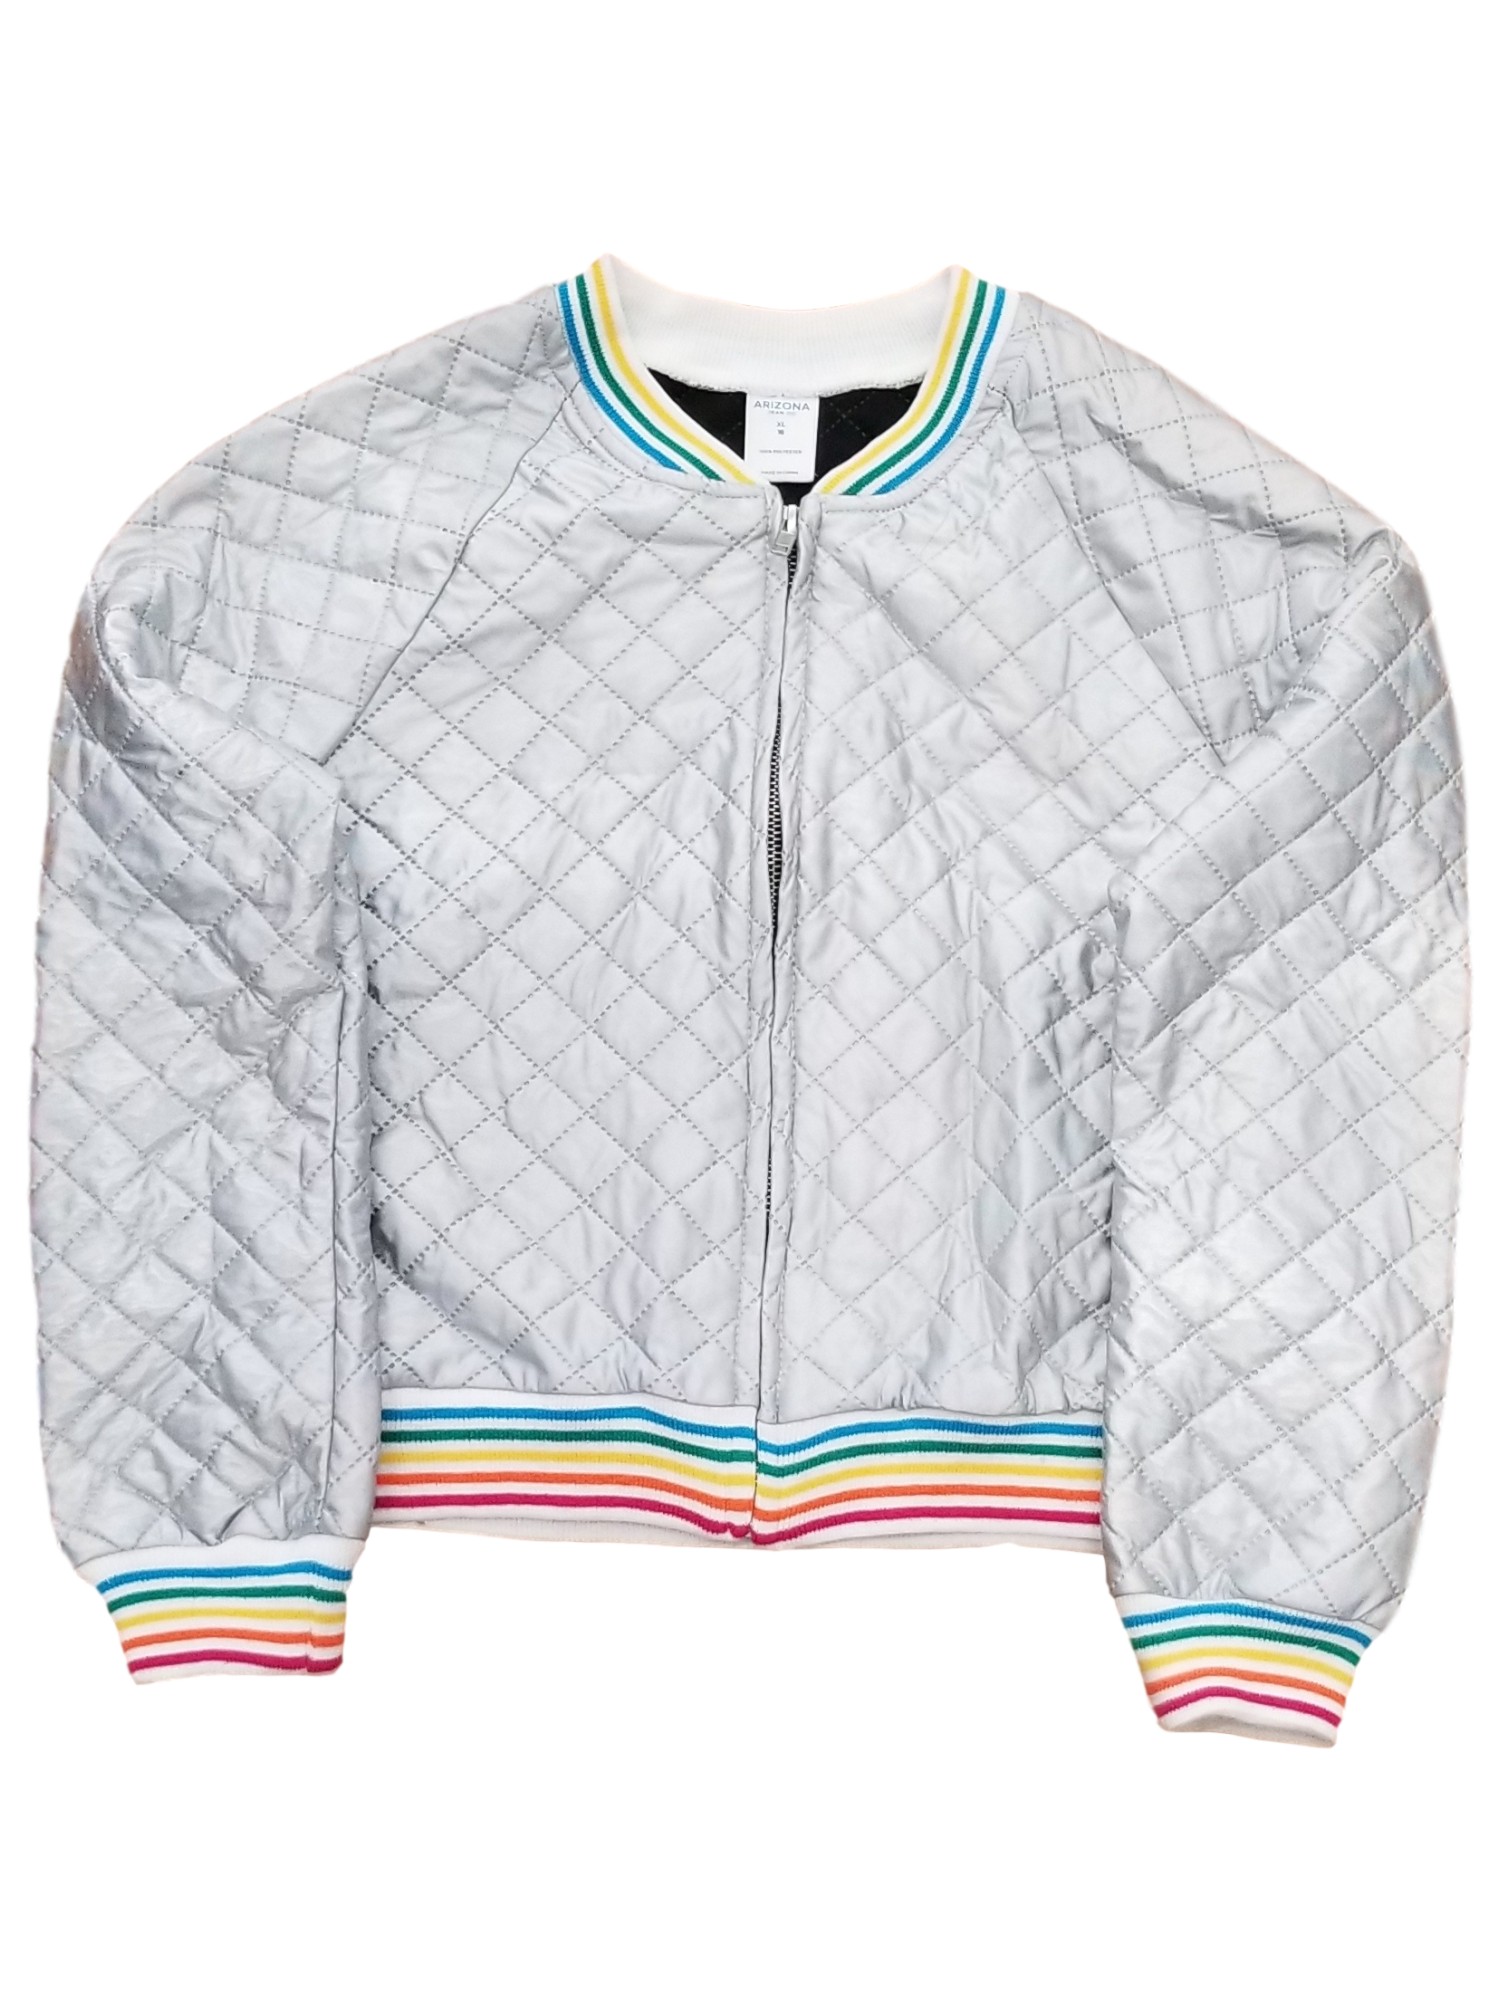 Arizona Girls Rainbow Stripes Silver Shimmer Zip Up Quilted Jacket Coat